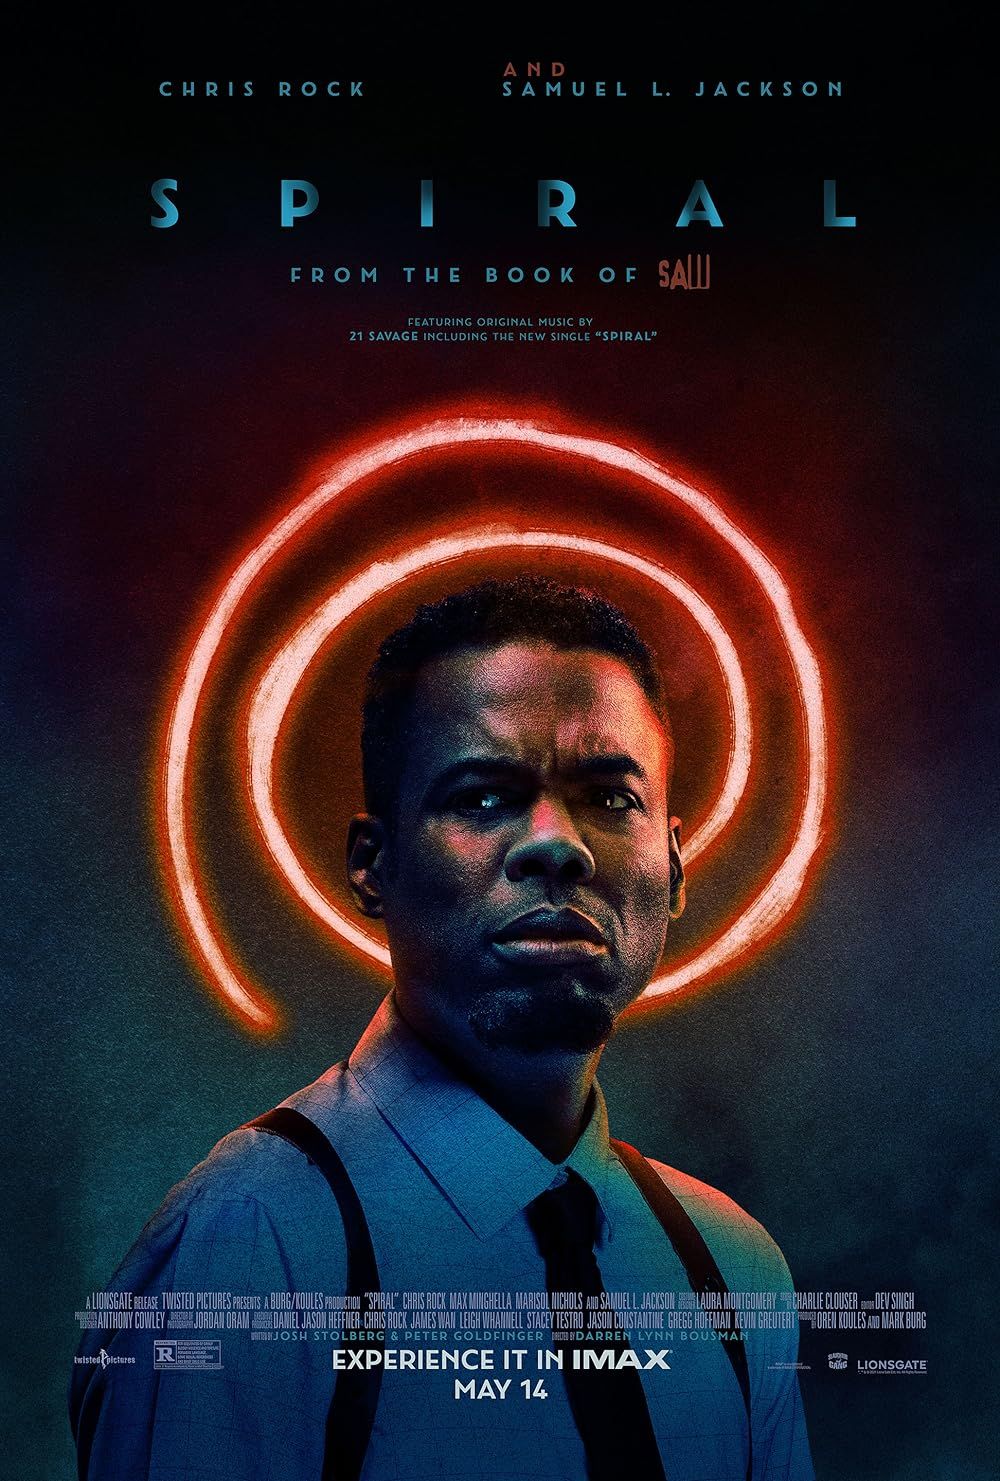 Chris Rock looking confused on the poster of Spiral Saw